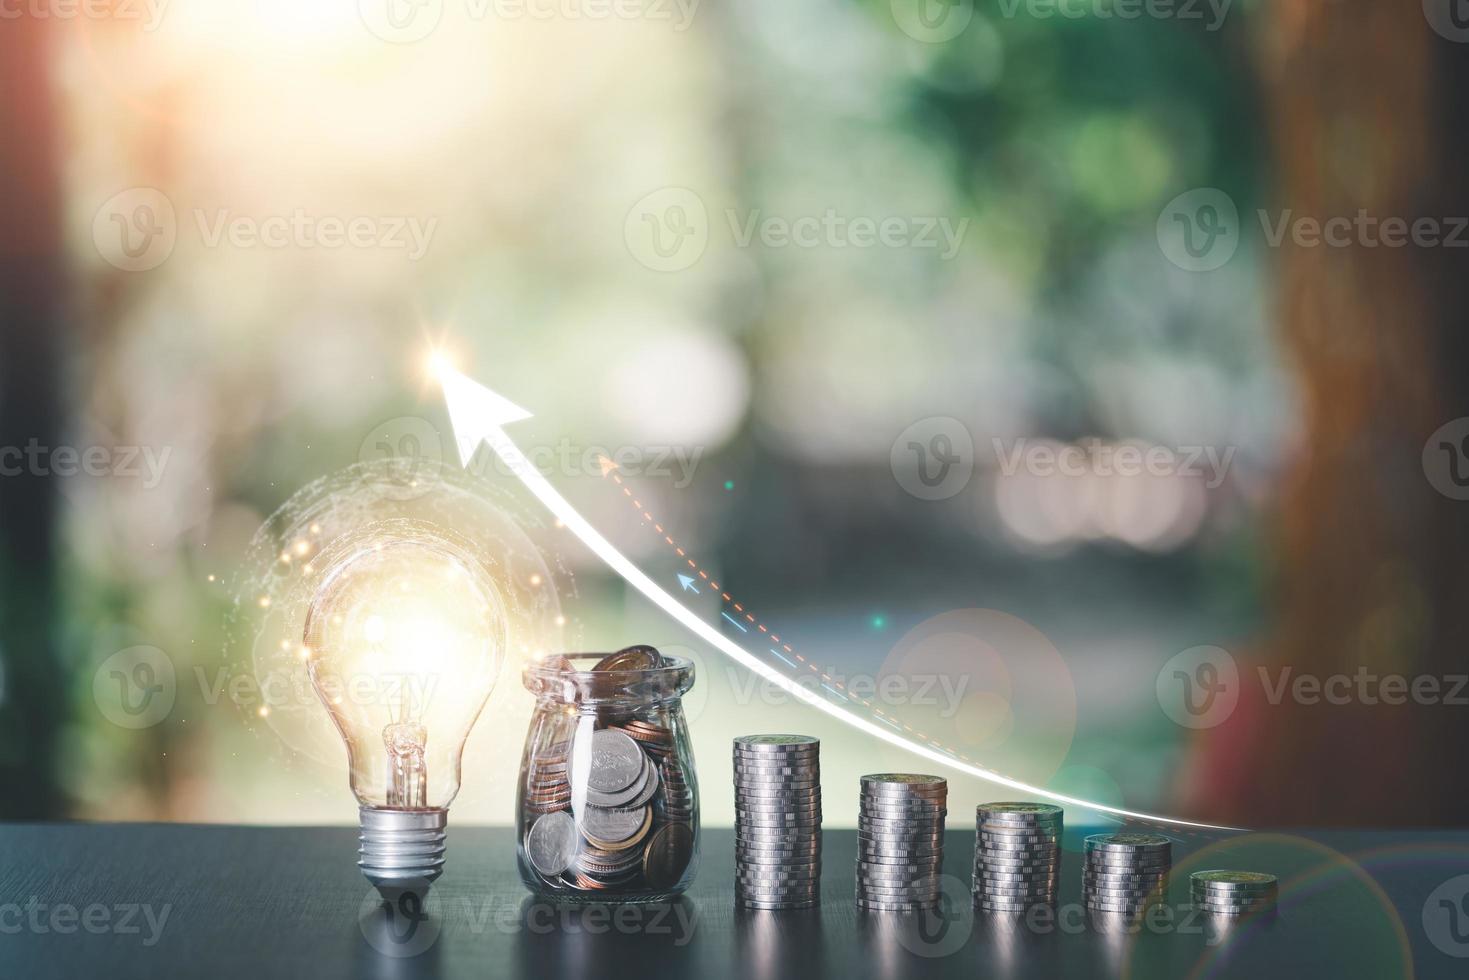 light bulb, a glass jar, and some coins lay on table,finance and banking, fund growth and savings concept, proportional money management to spend effectively,interest growth graph, plan for retirement photo